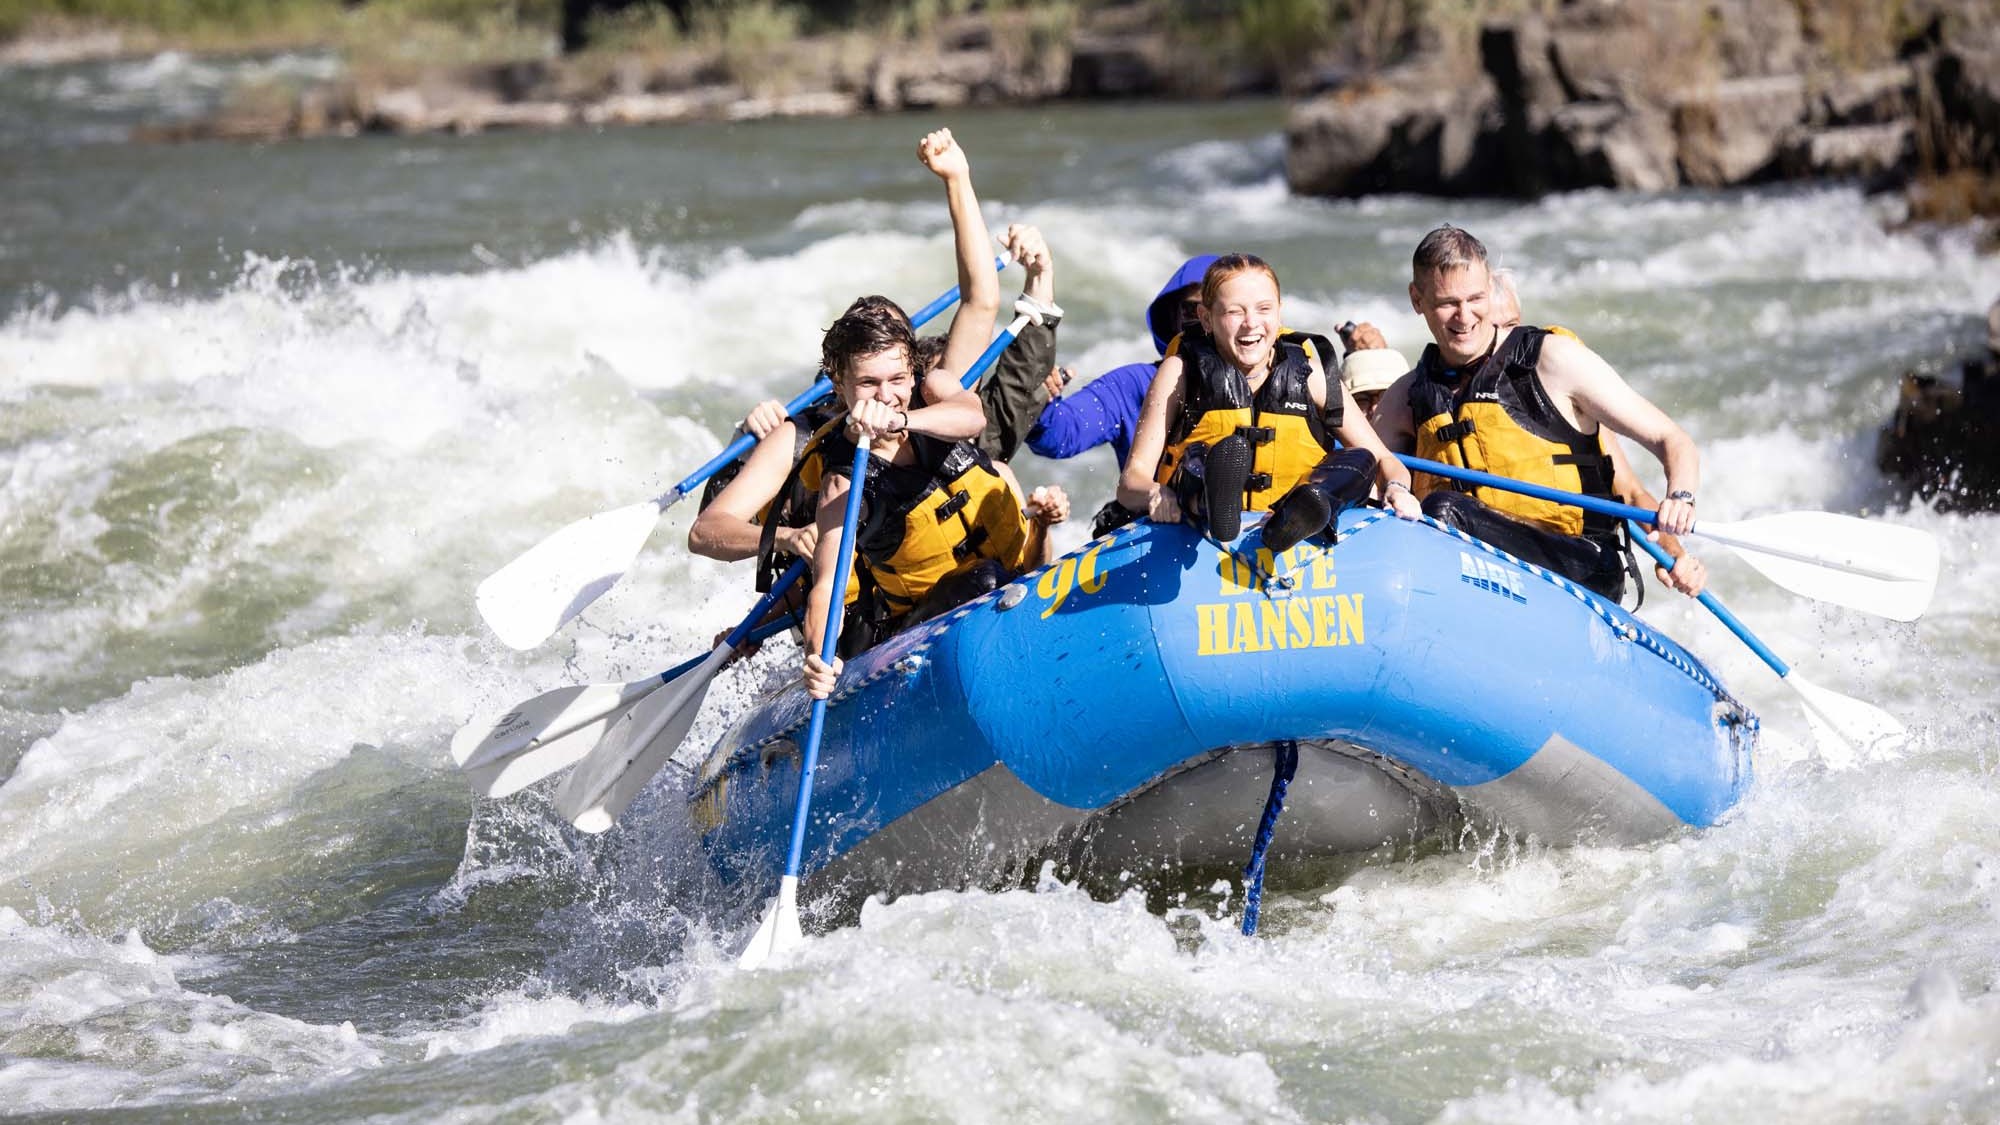 A young girl rides on the front of a blue Dave Hansen Whitewater raft as they paddle through a whitewater rapid.